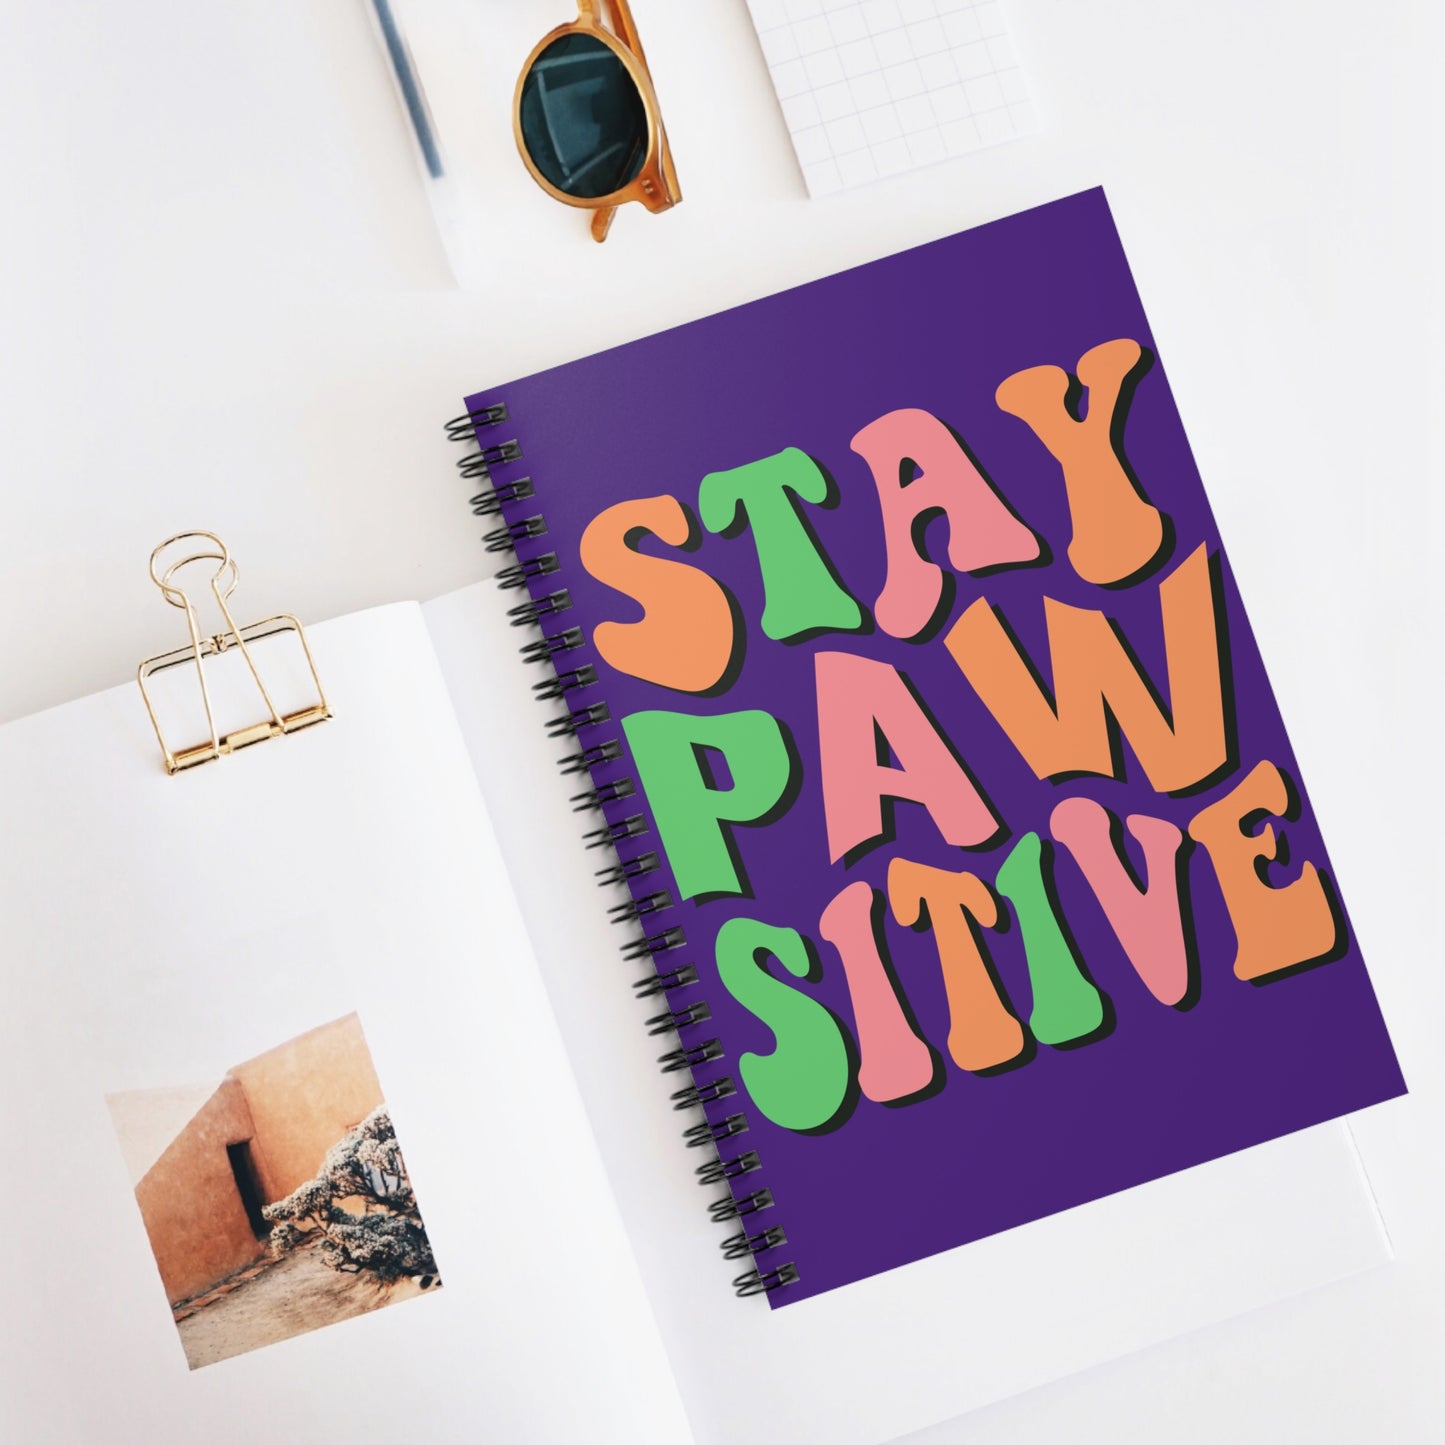 Stay Pawsitive: Spiral Notebook - Log Books - Journals - Diaries - and More Custom Printed by TheGlassyLass.com